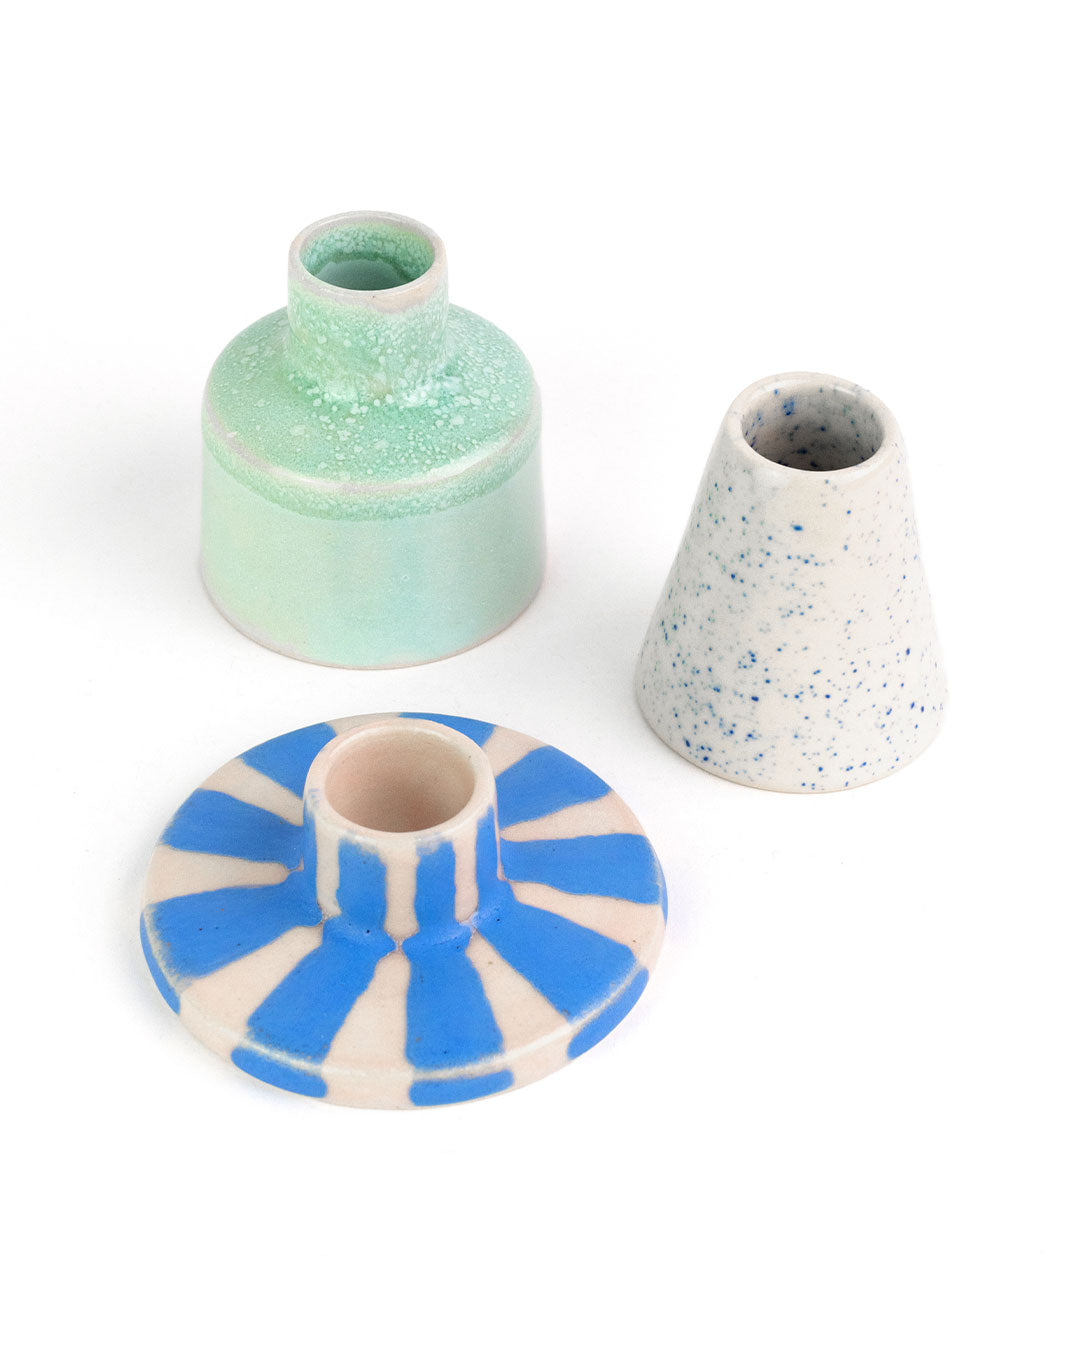 Candlestick holders MIX - Set of 3 pottery Andrea Frieling Ceramics